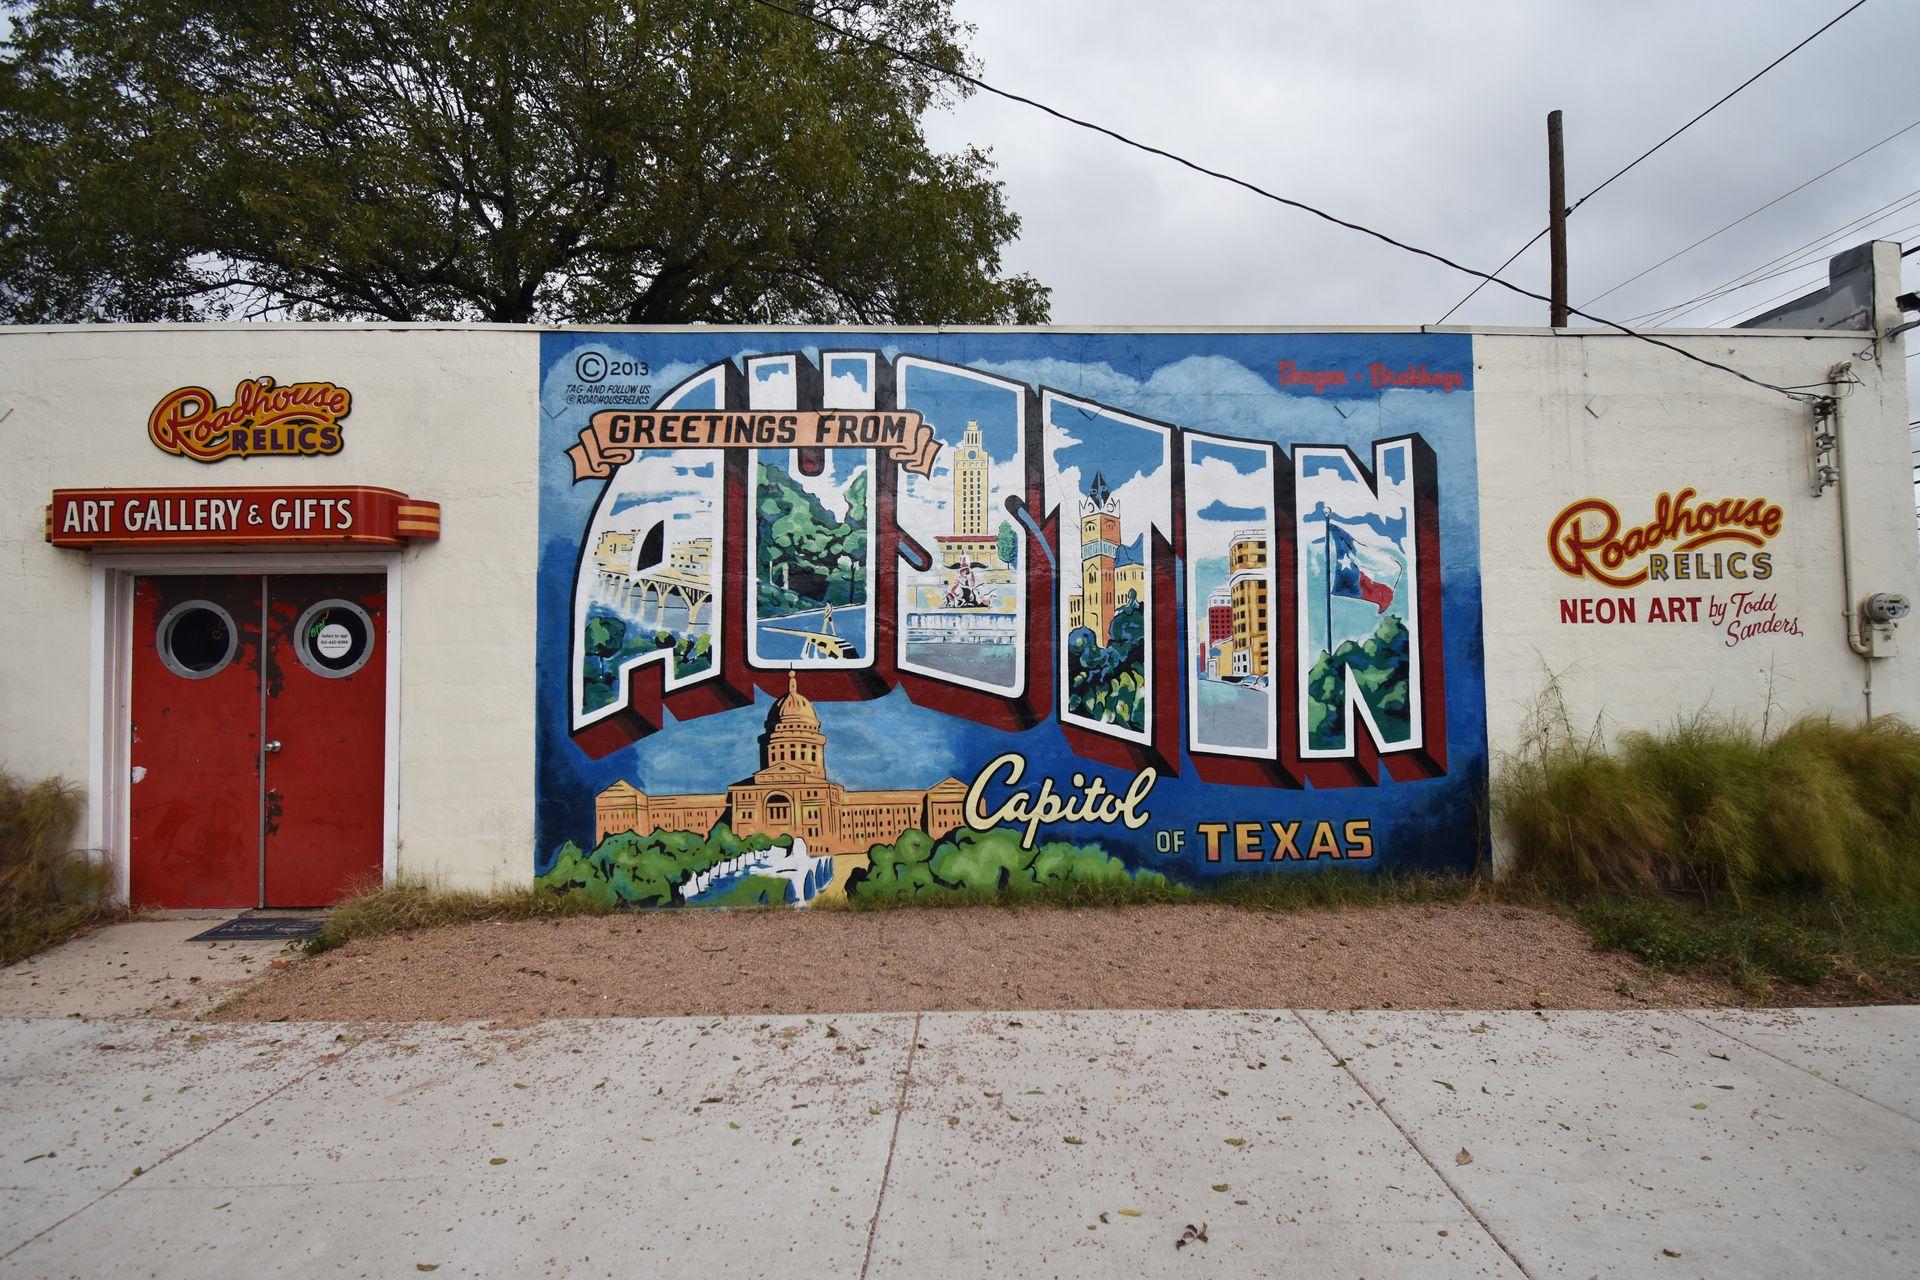 A colorful mural that reads "Greetings from Austin" on the side of Roadside Relics